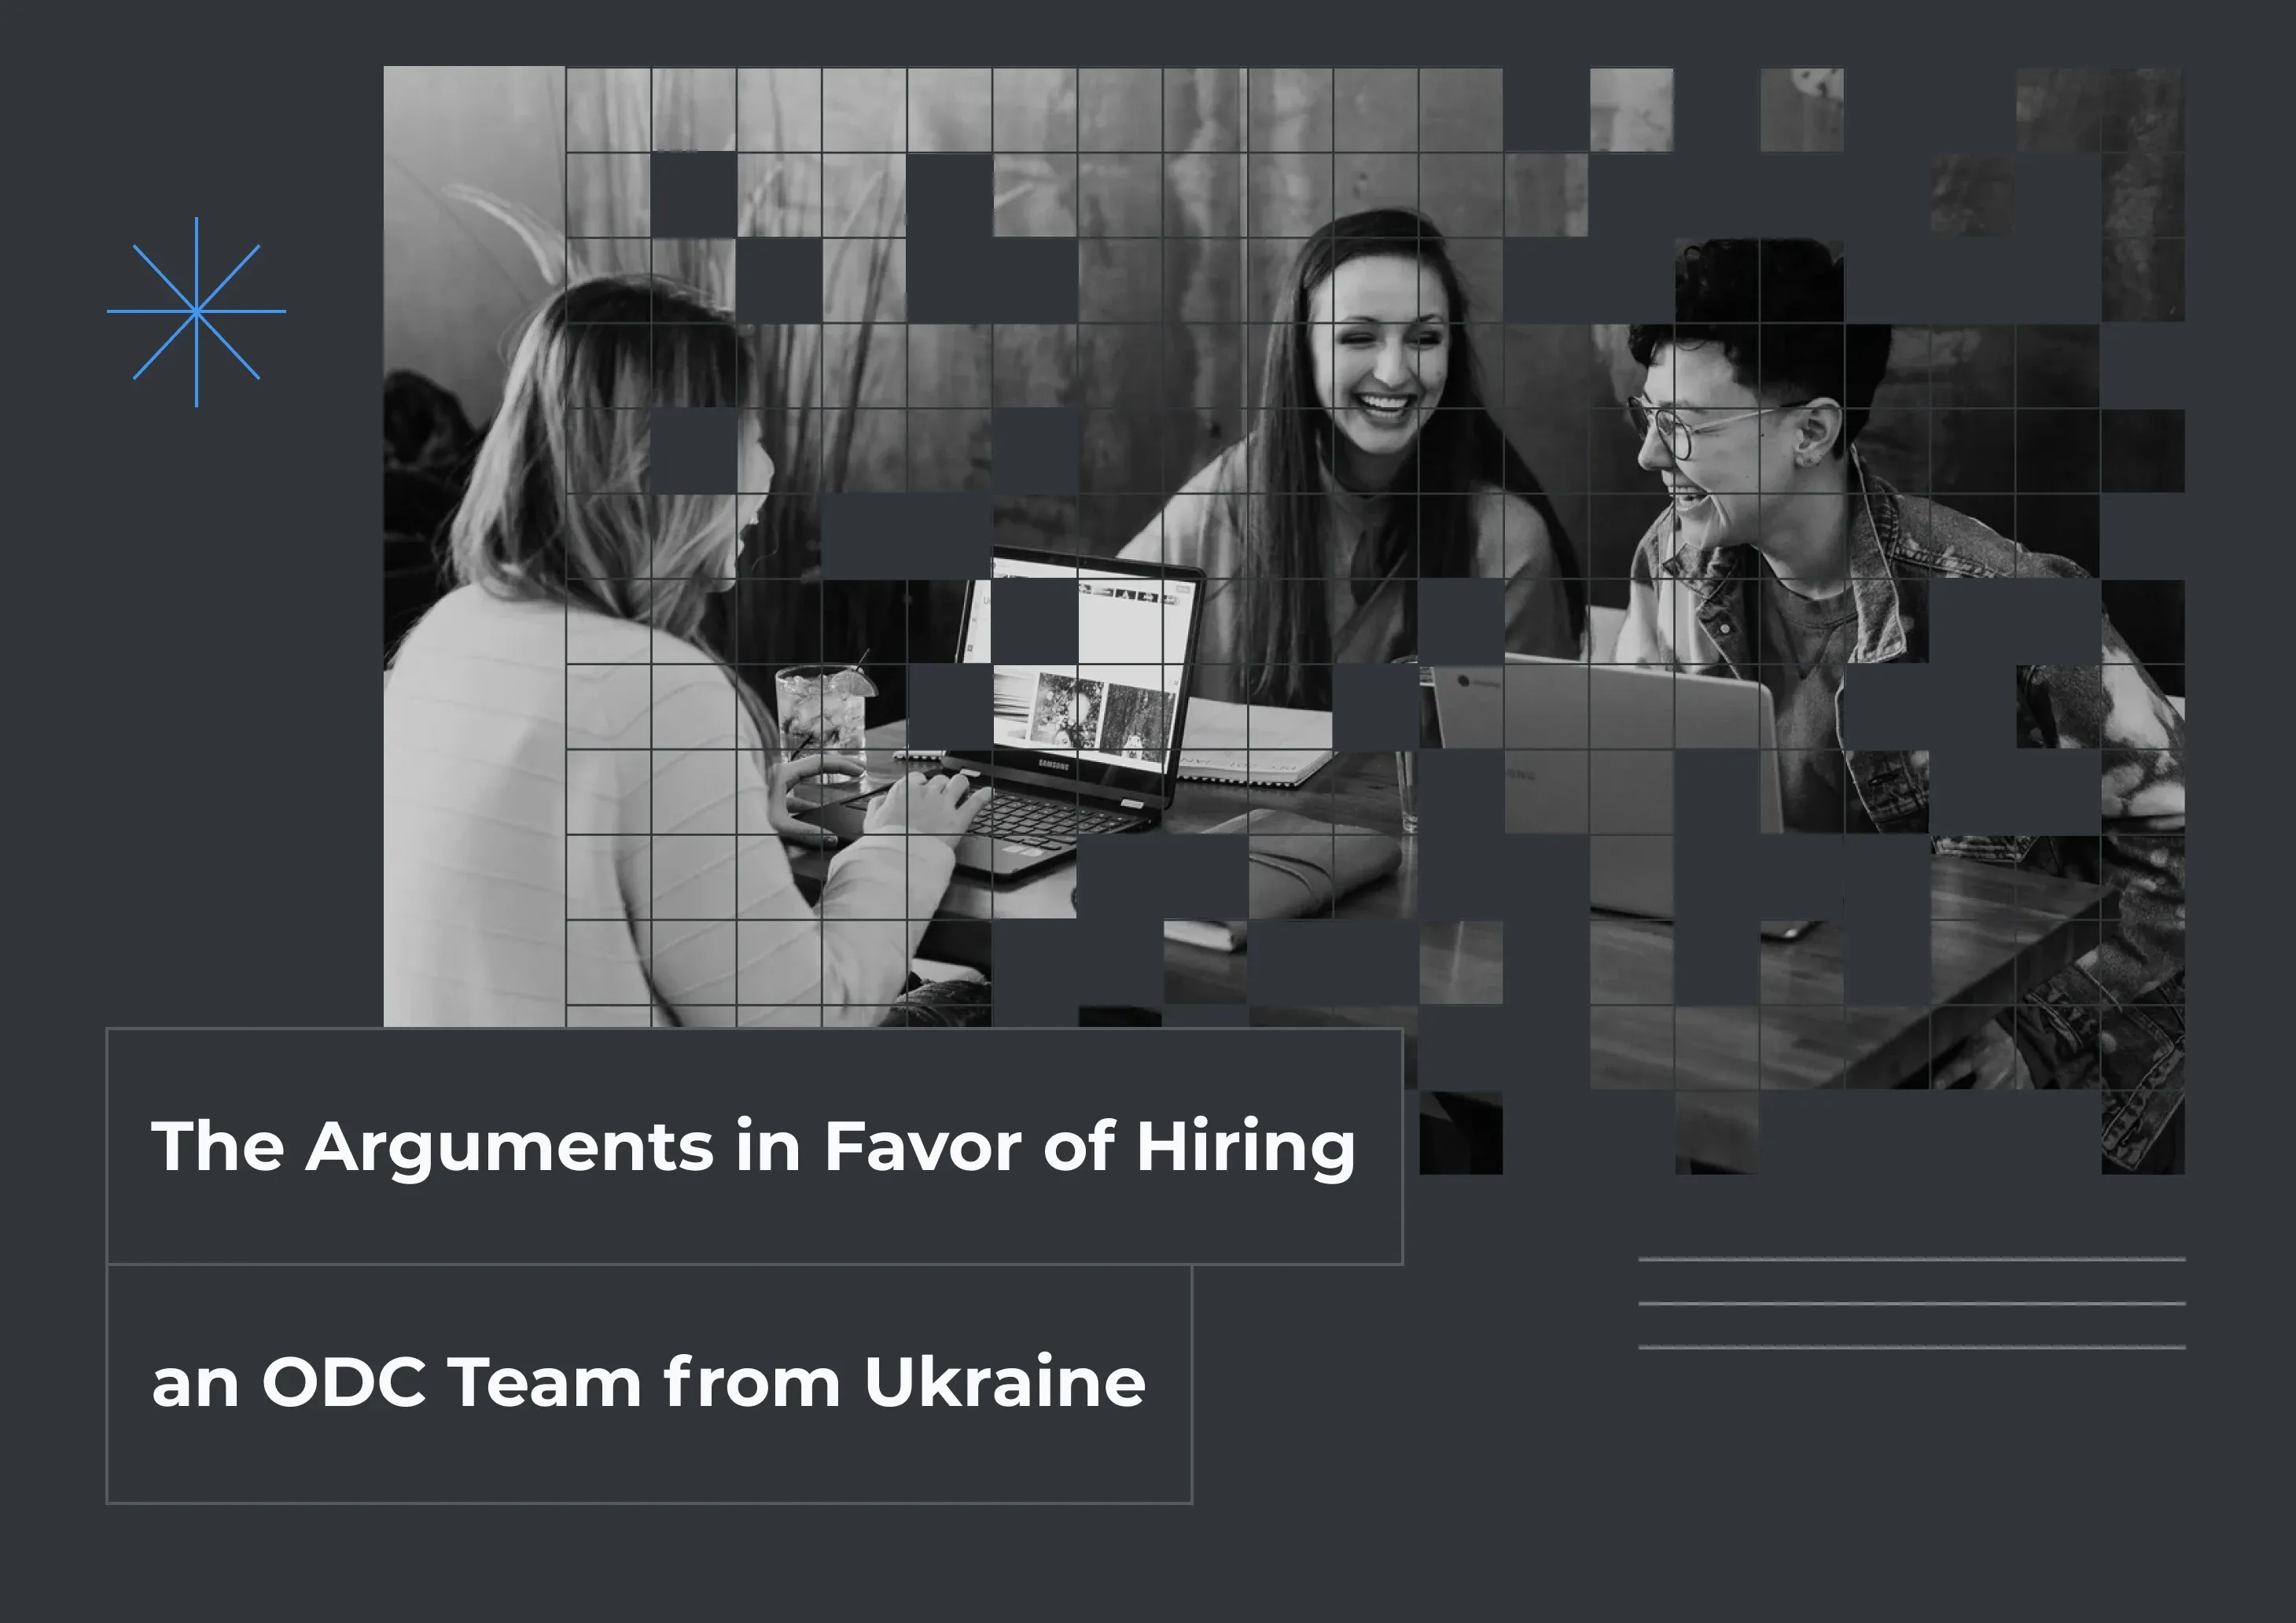 The Arguments in Favor of Hiring an ODC Team from Ukraine